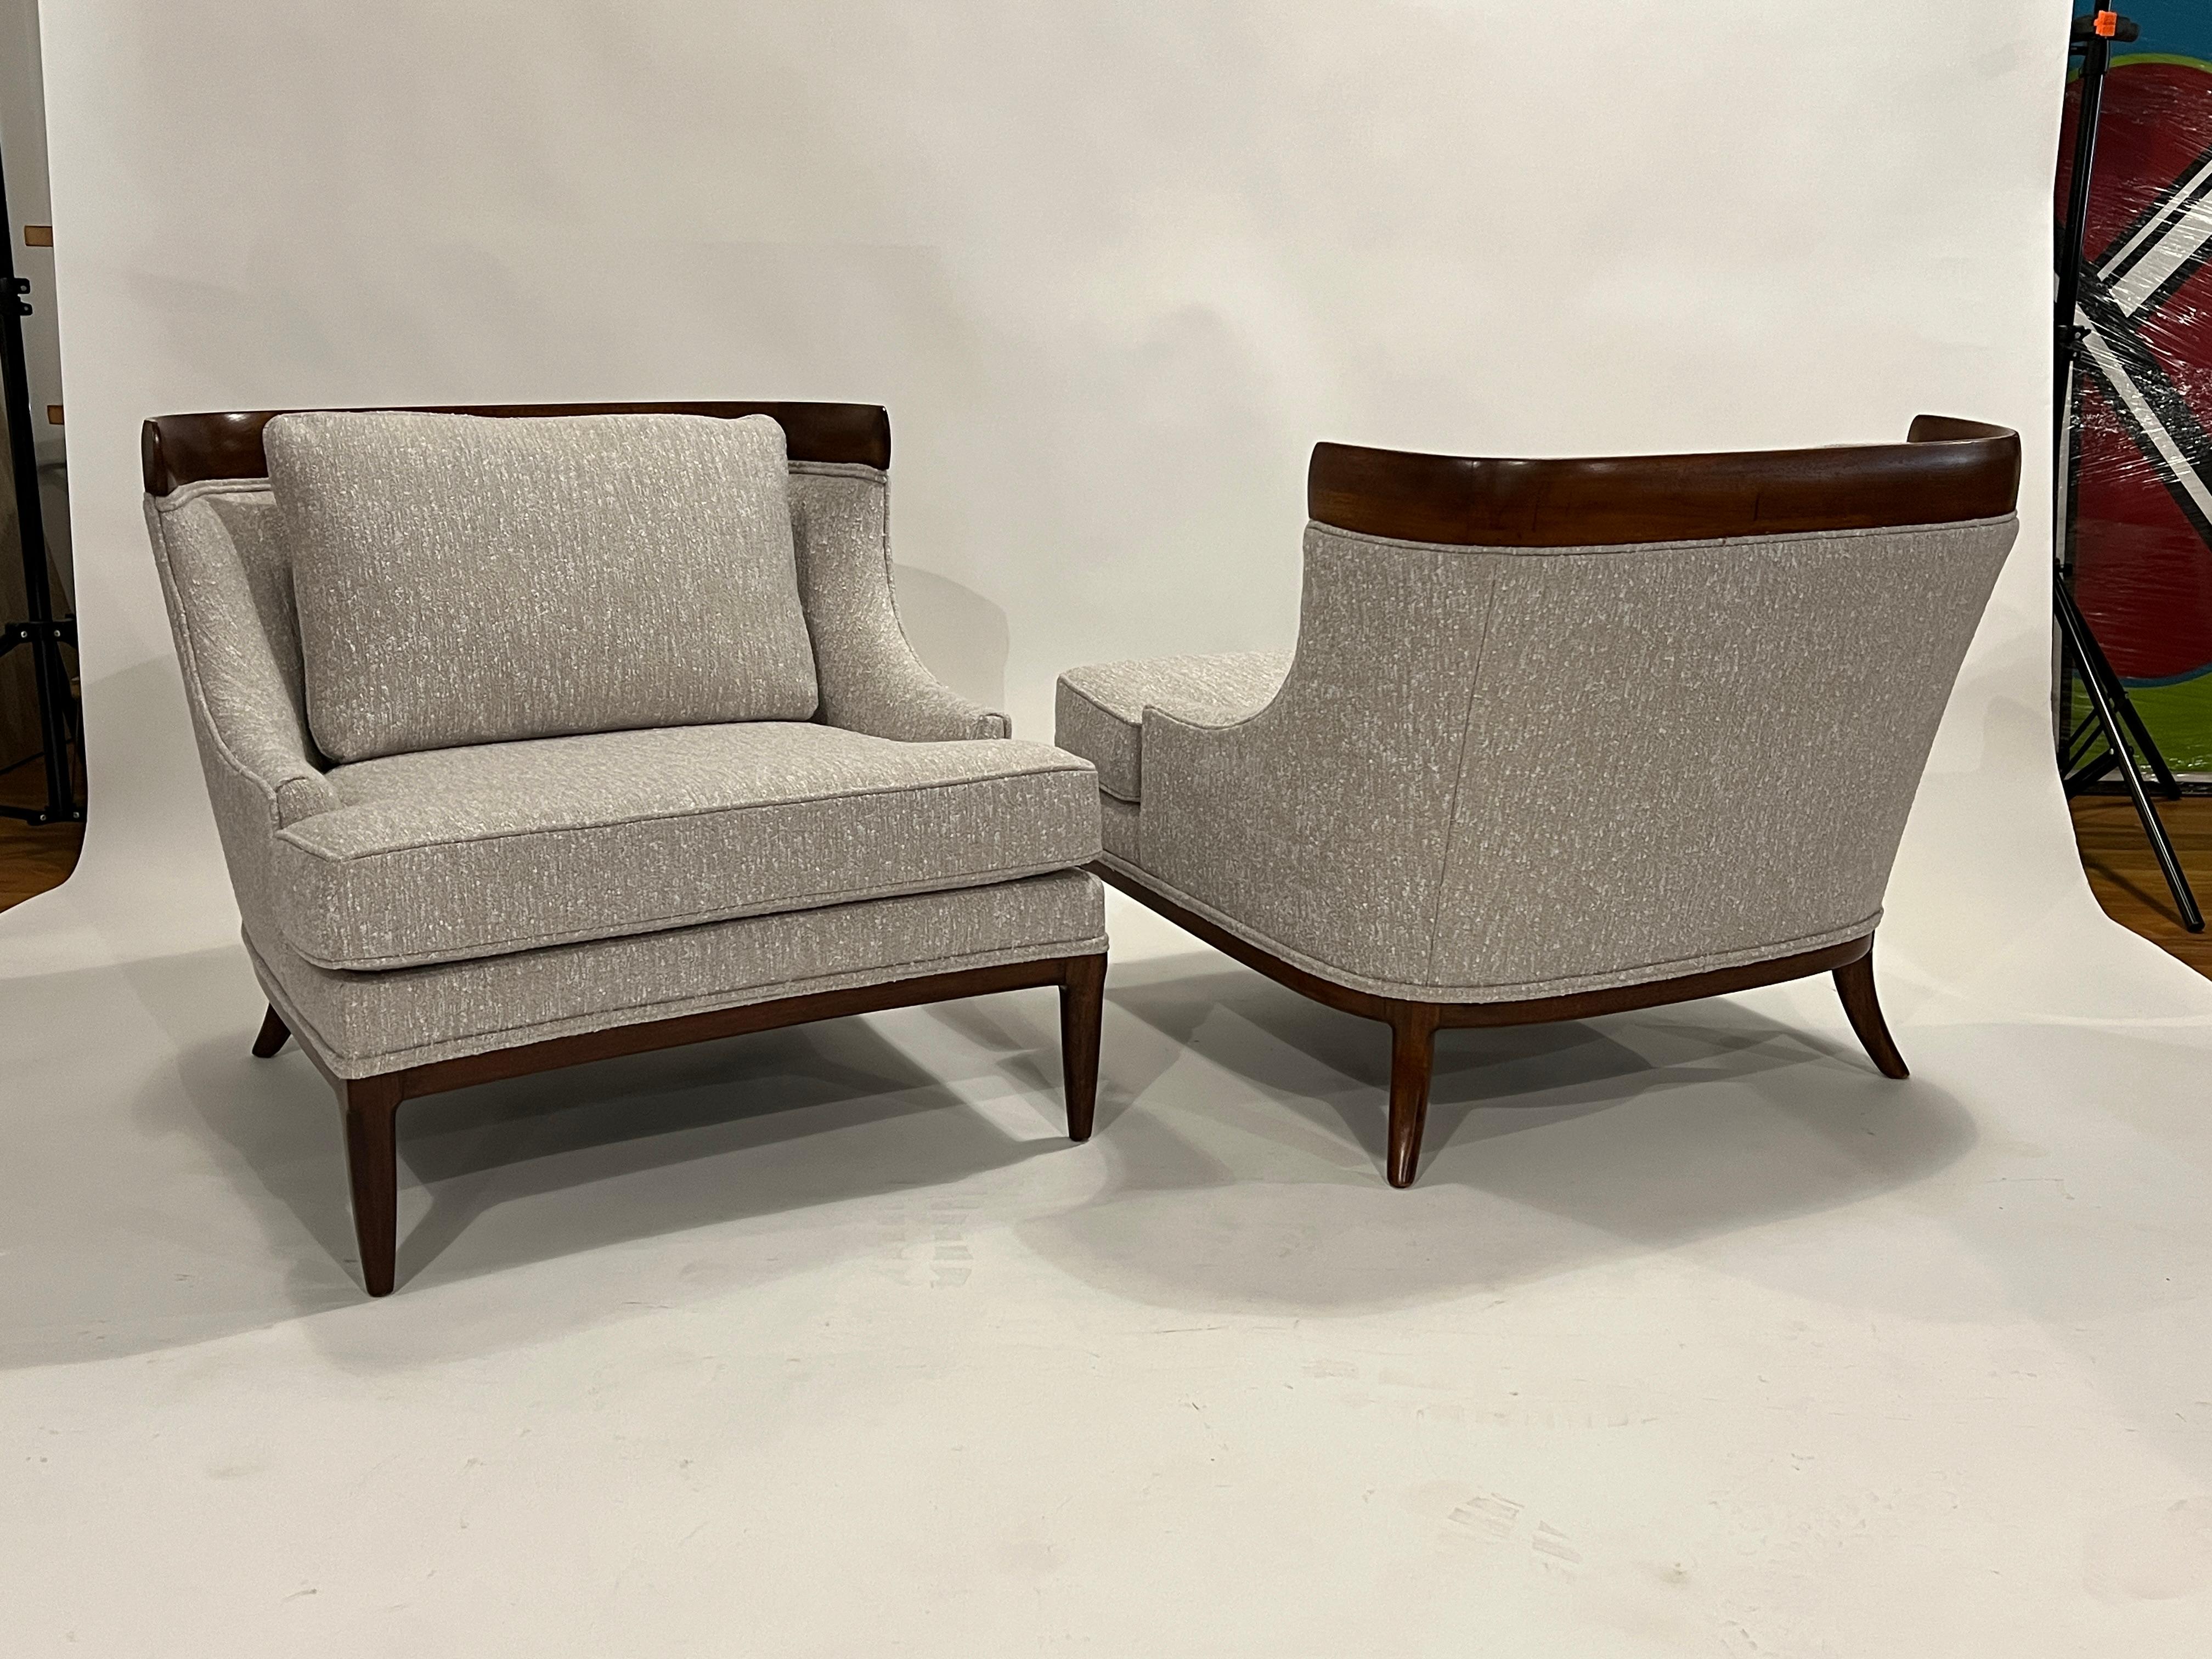 Mid-20th Century Tomlinson Sophisticate Lounge Chairs by Erwin Lambeth For Sale